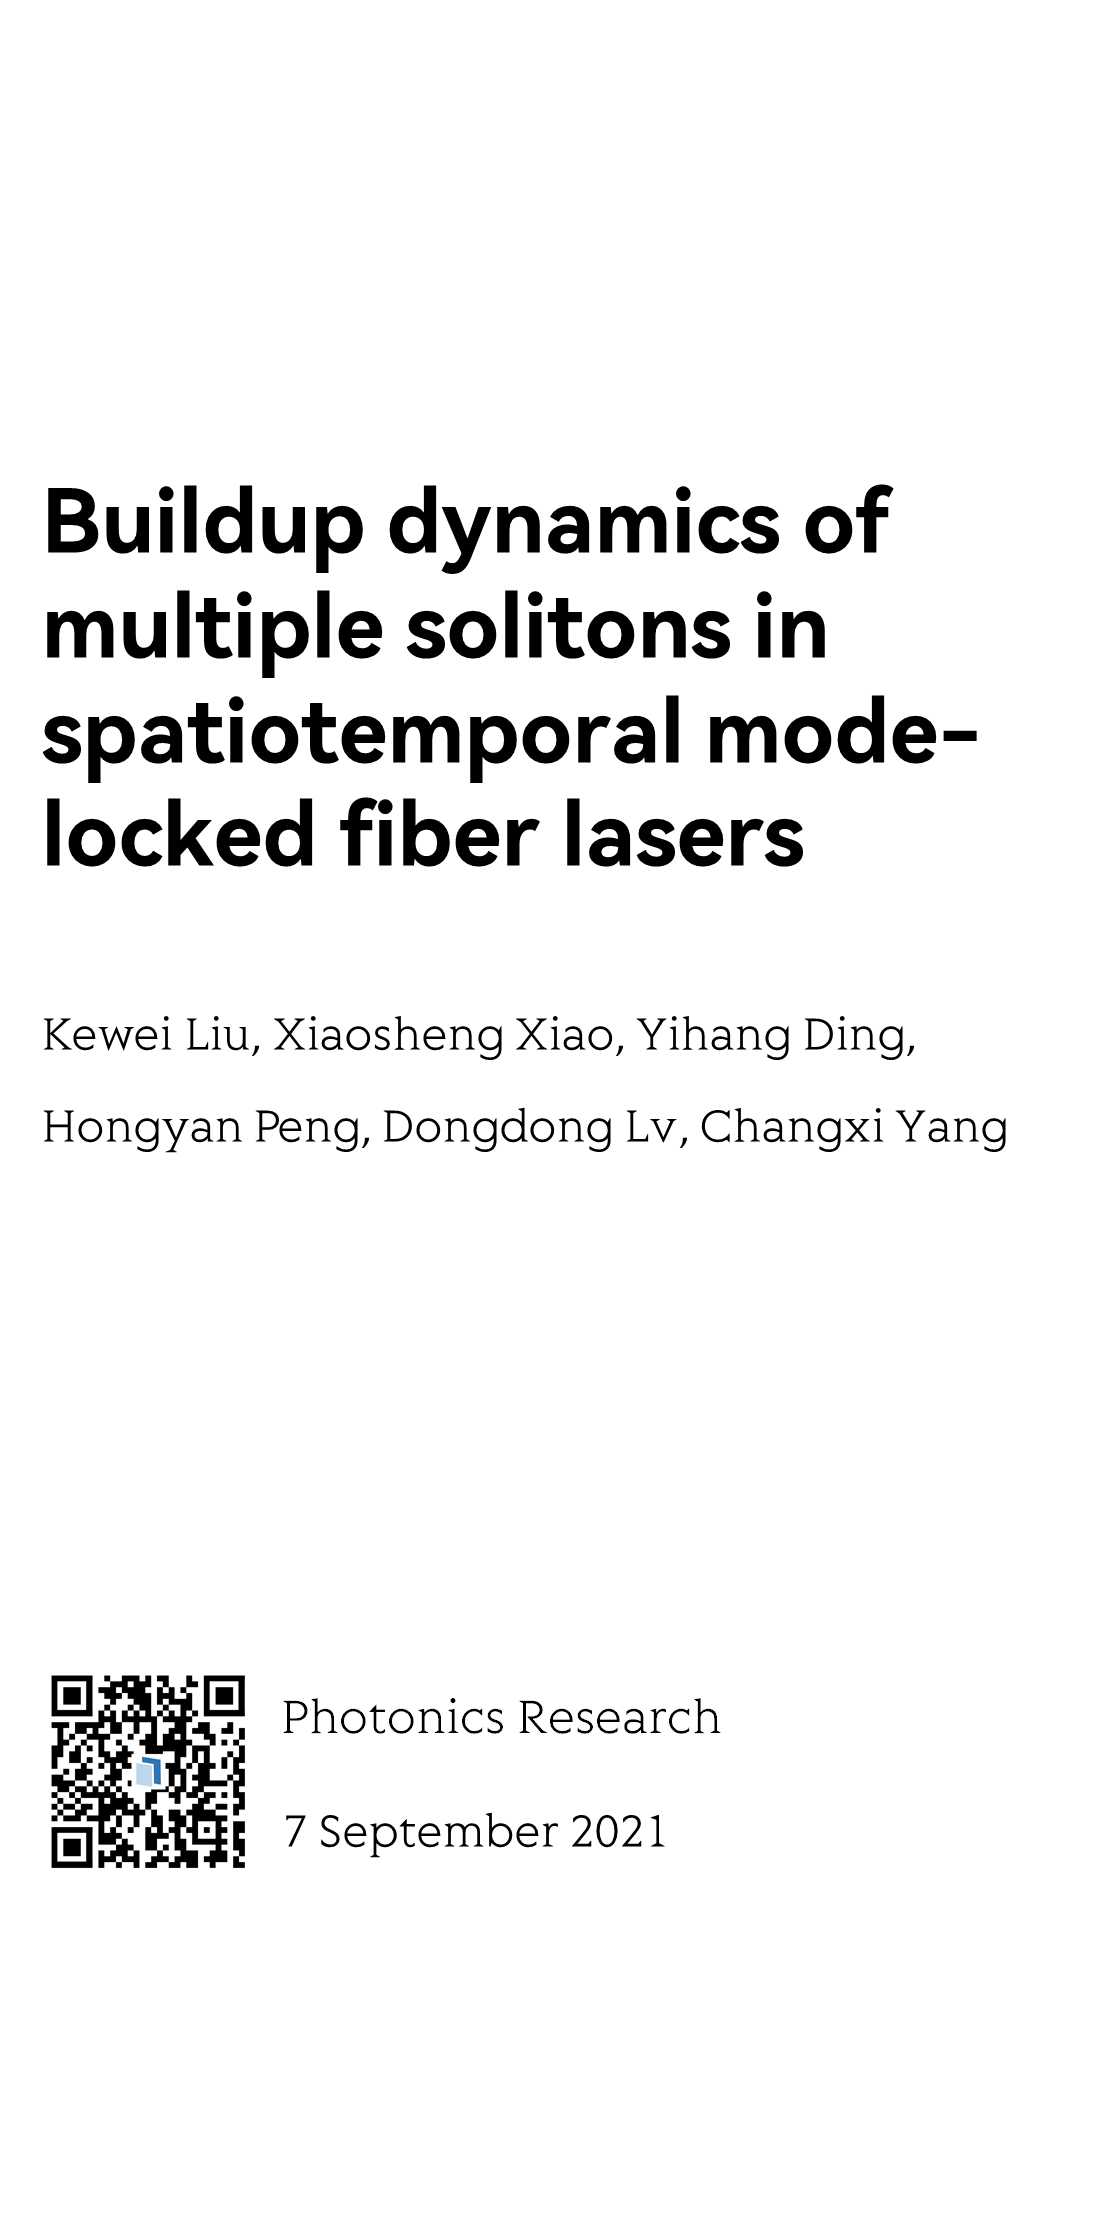 Buildup dynamics of multiple solitons in spatiotemporal mode-locked fiber lasers_1